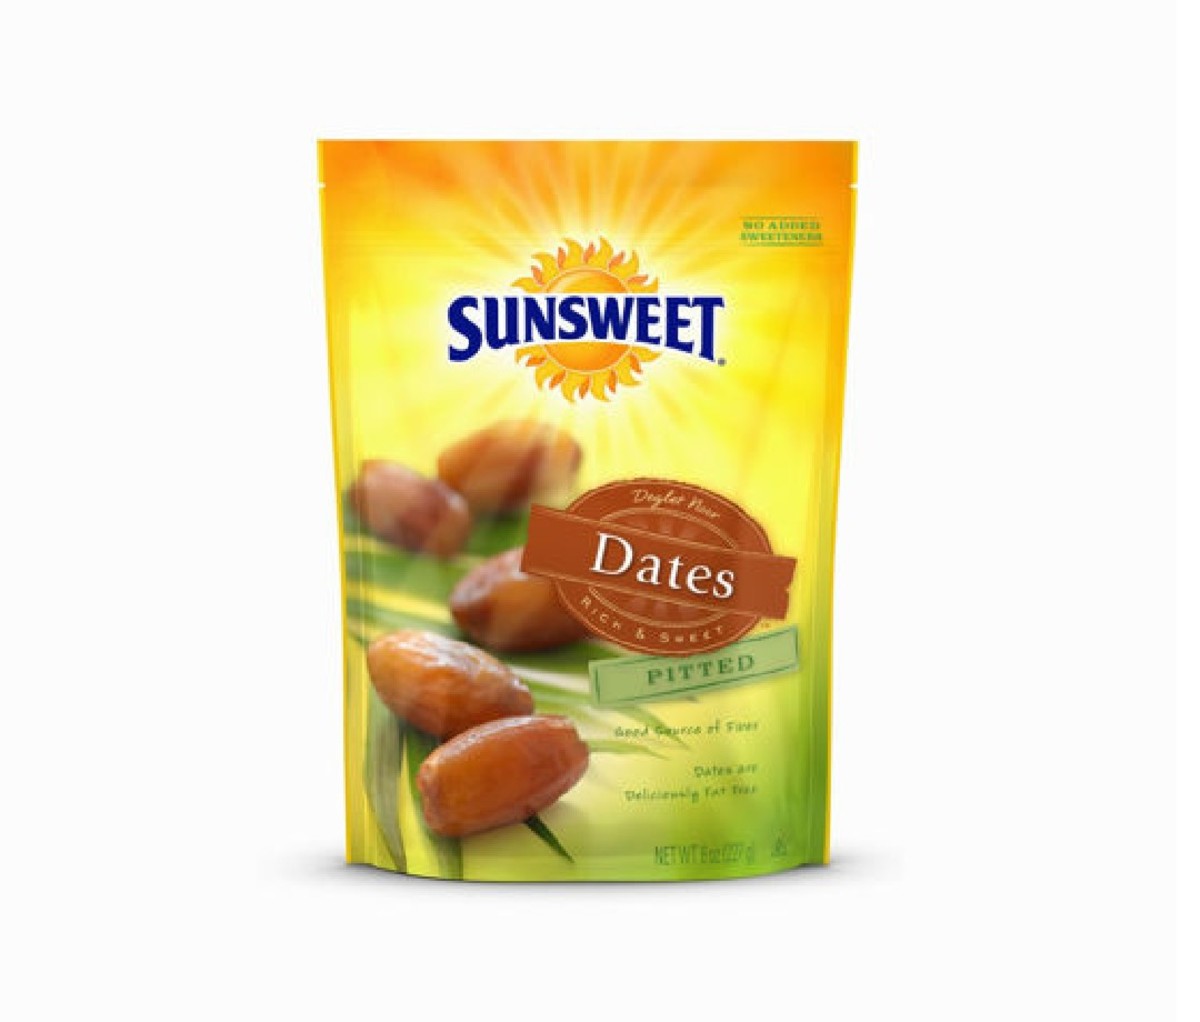 Sun-sweet pitted dates